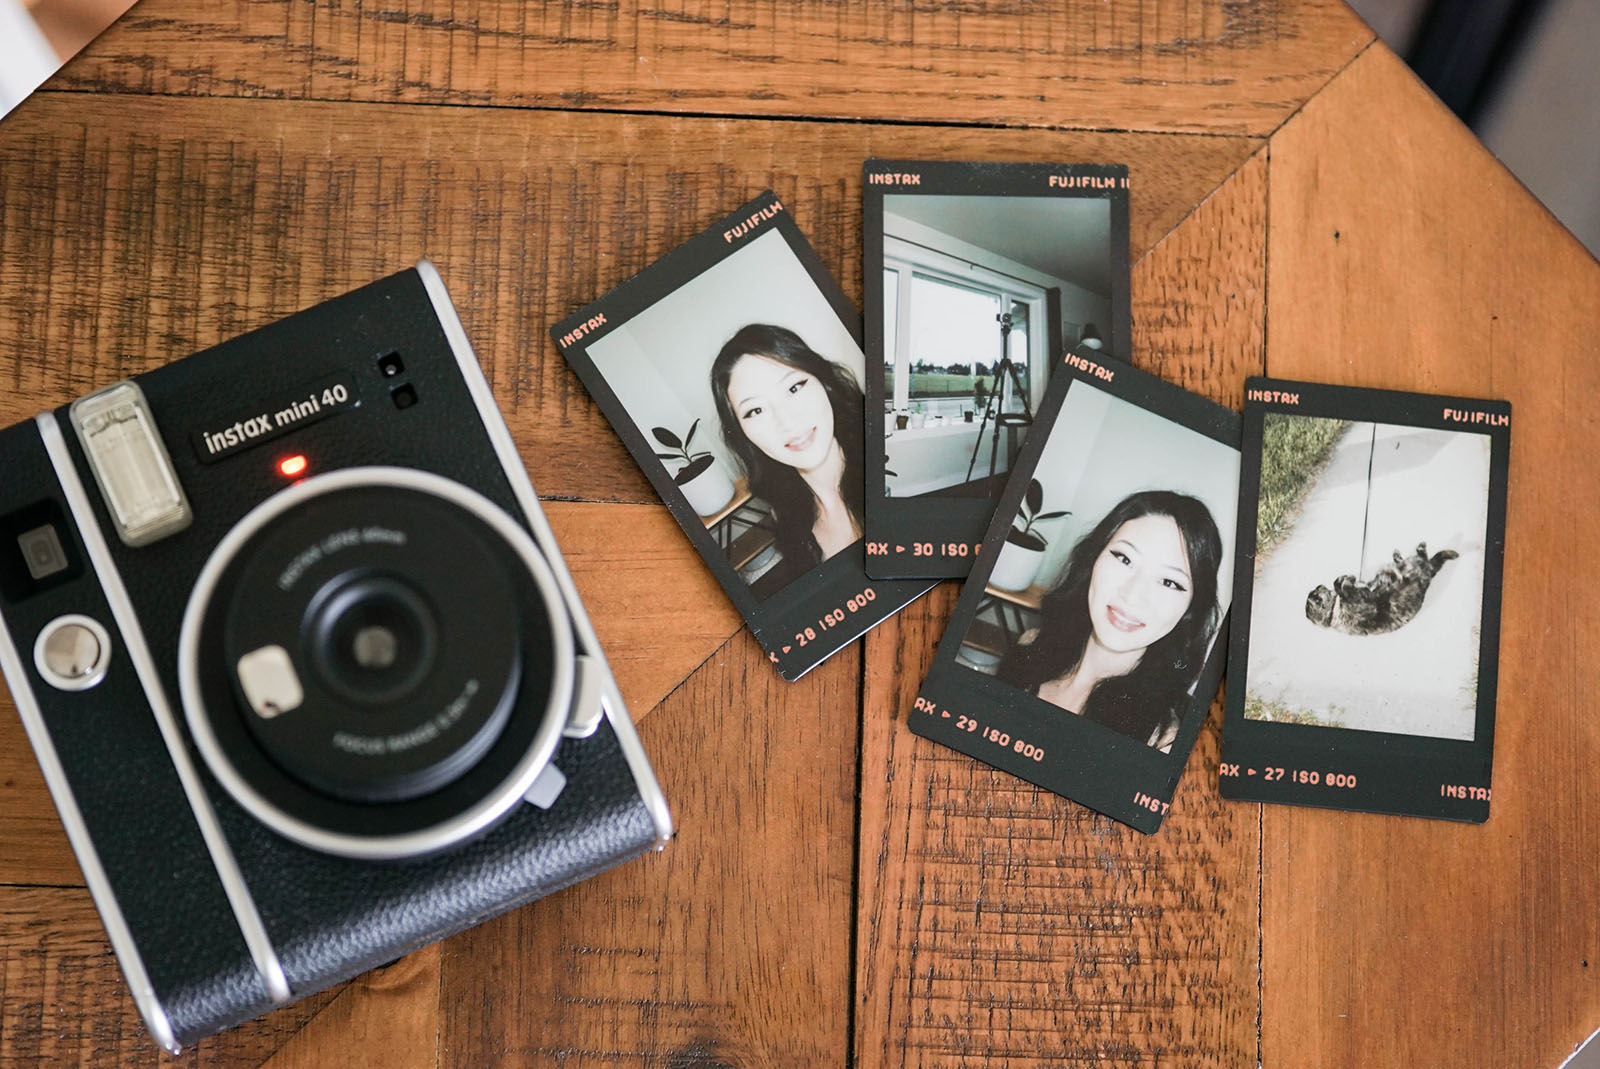 Fujifilm Instax Mini 40 review and samples